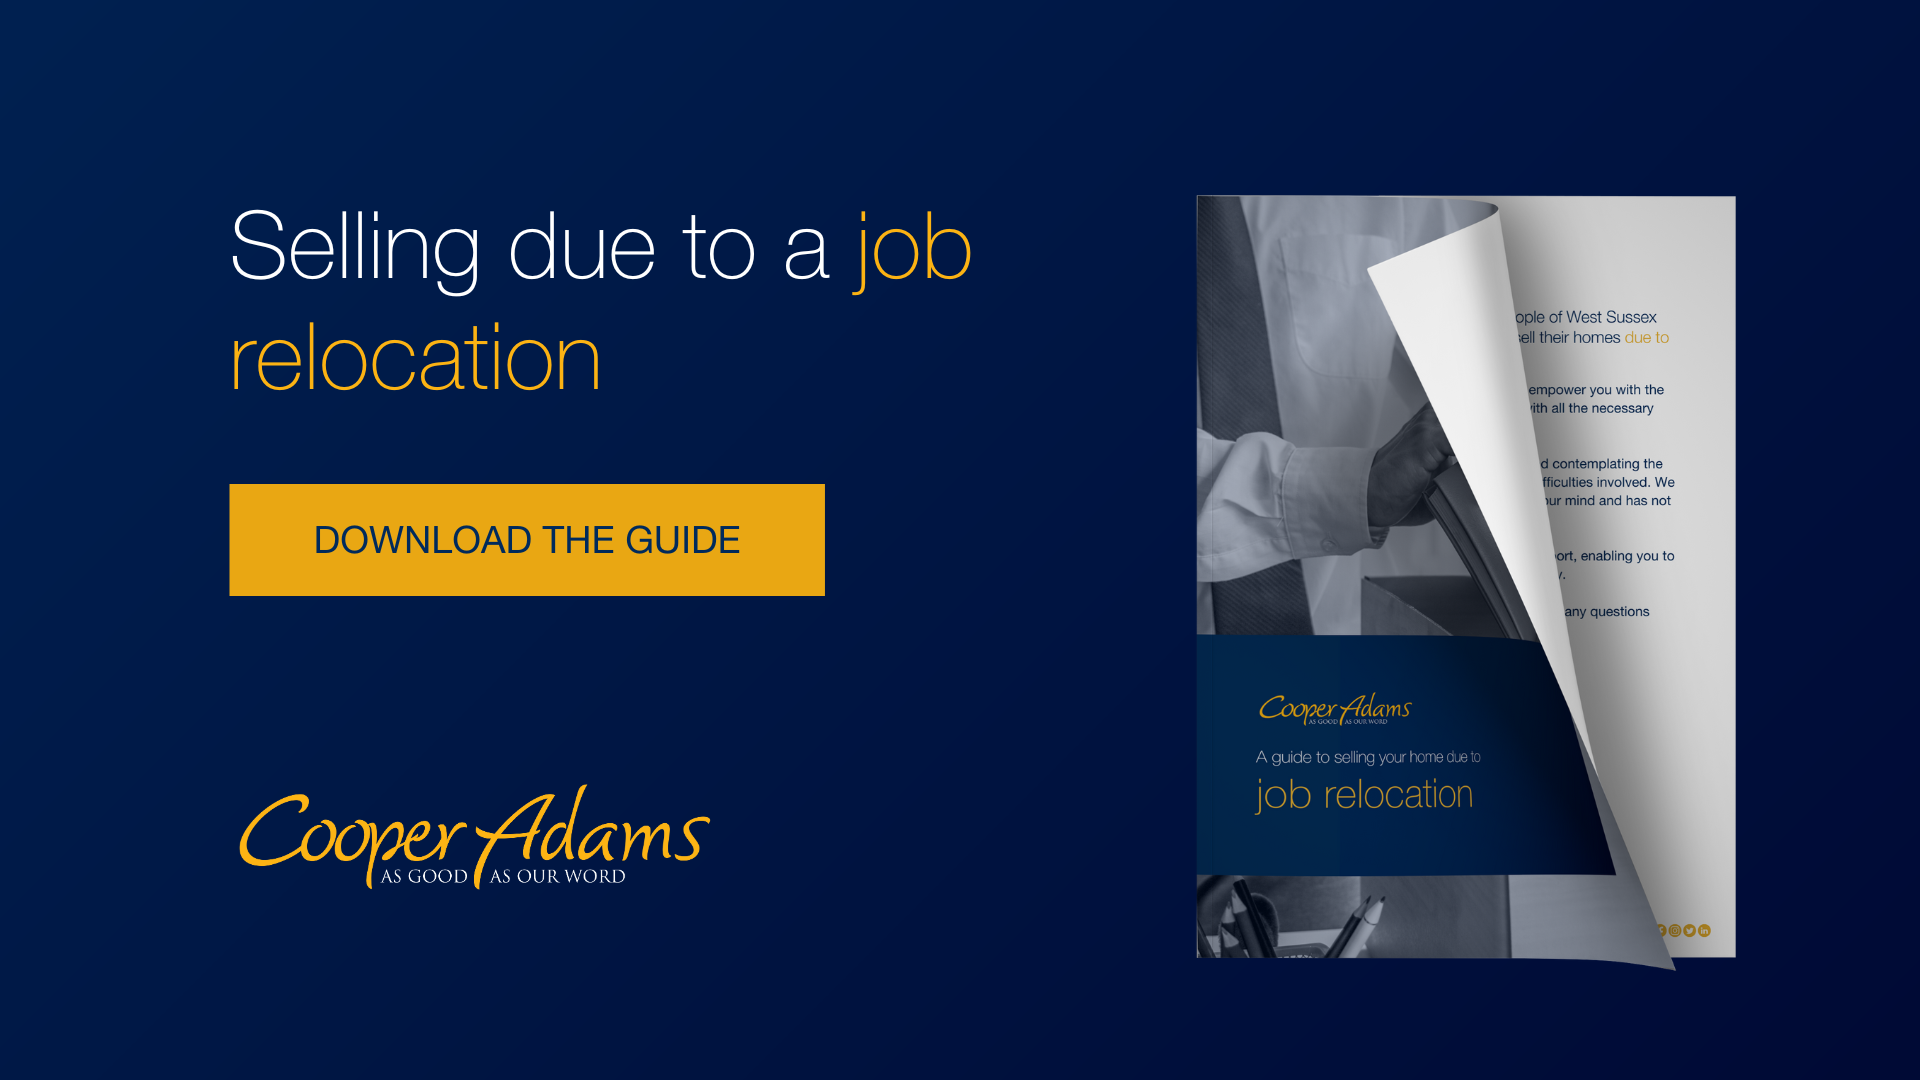 Download our guide to selling a property due to a job relocation